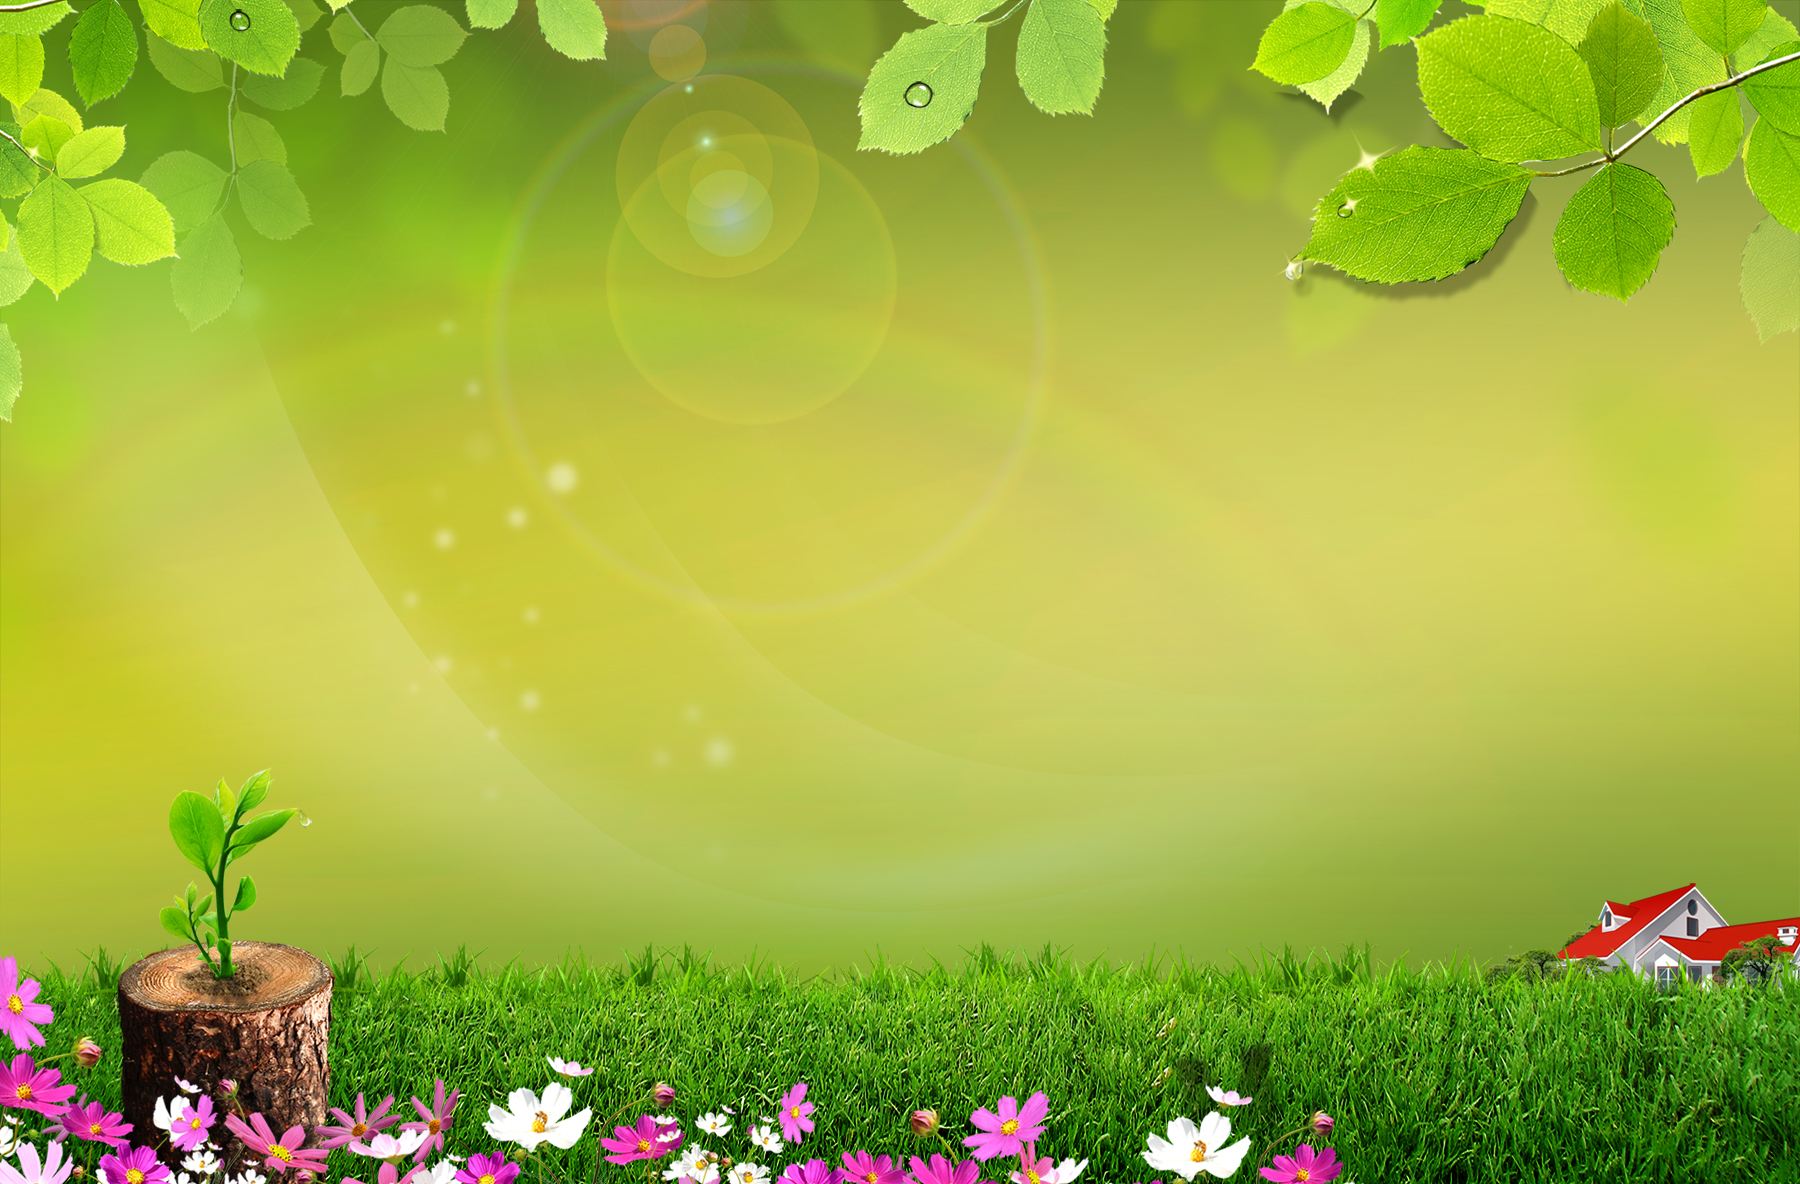 background images for photoshop psd files free download